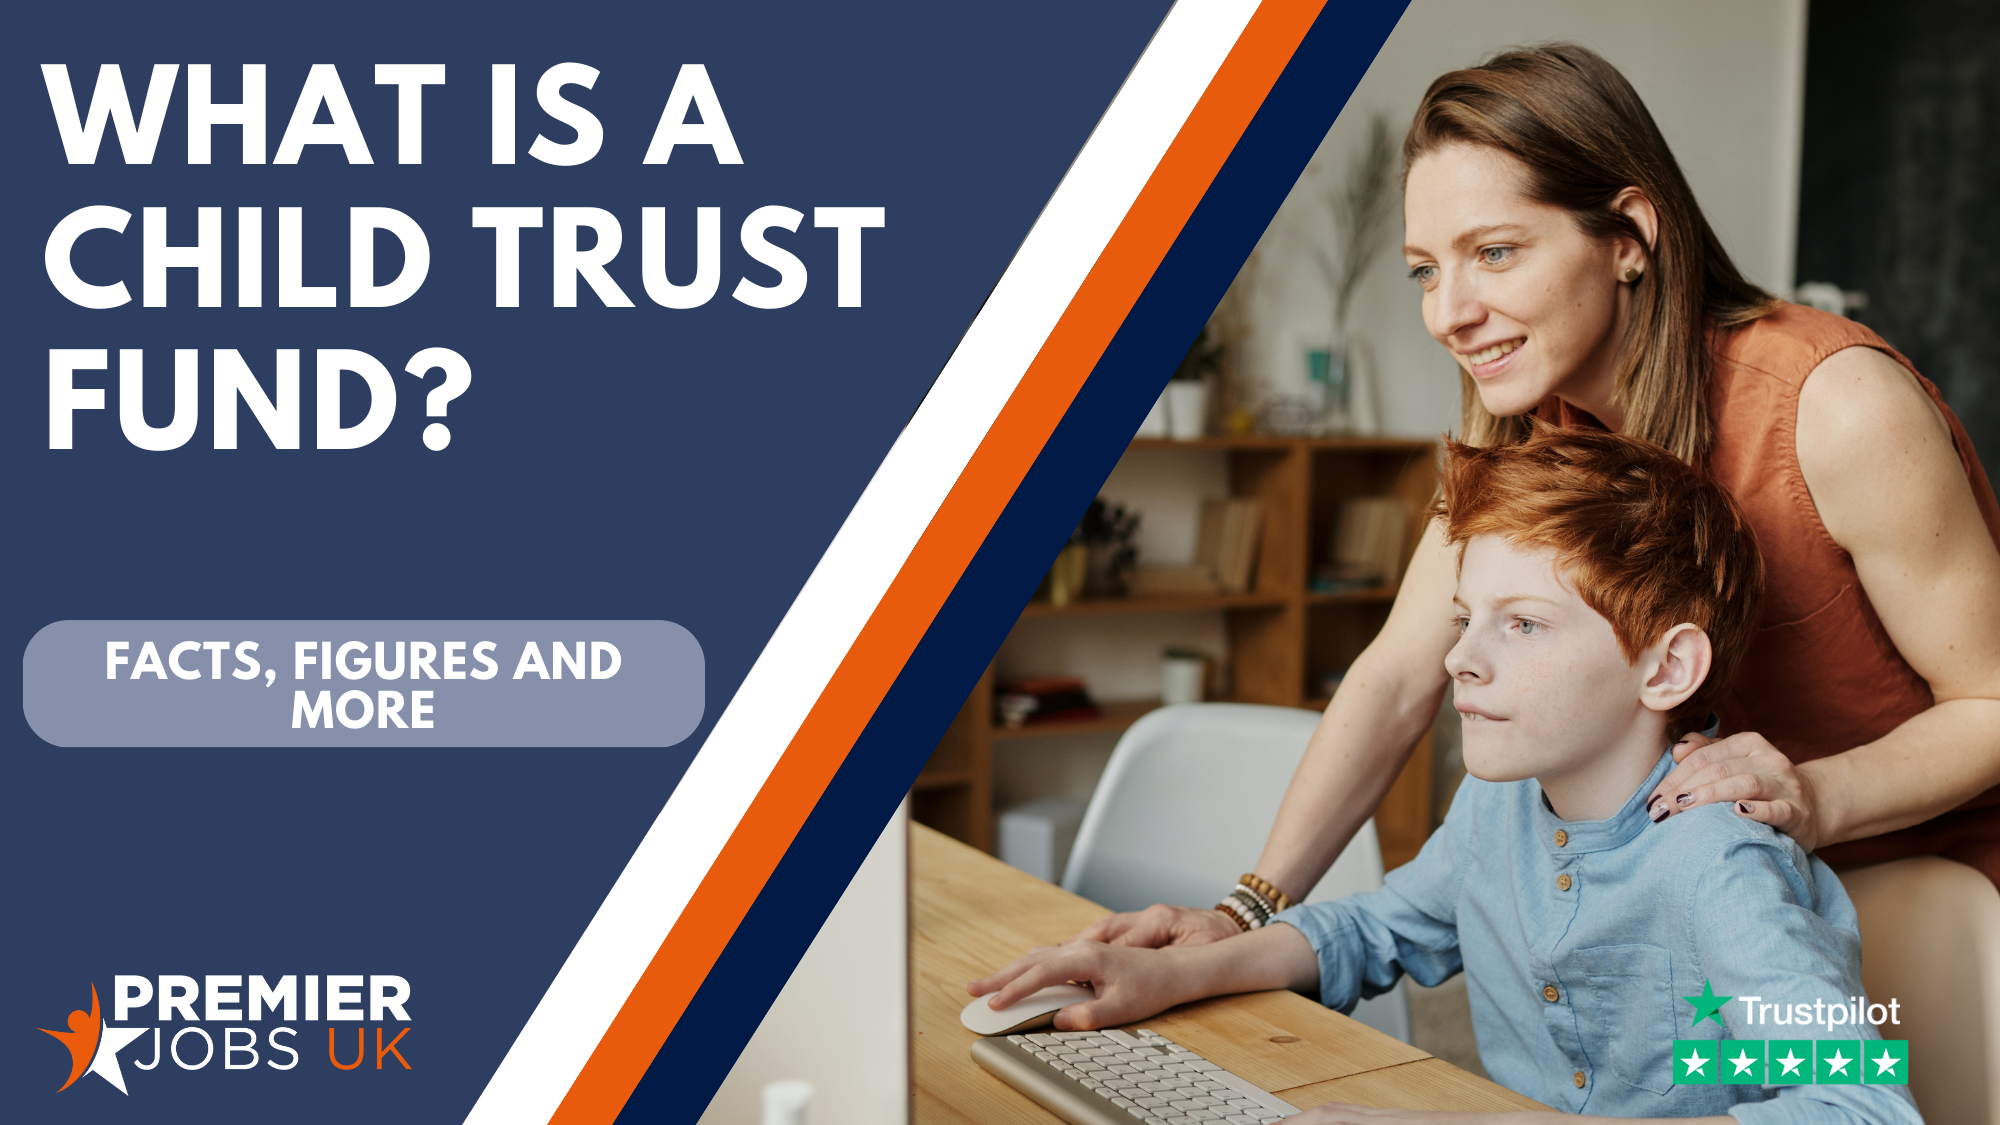 What is a Child Trust Fund?